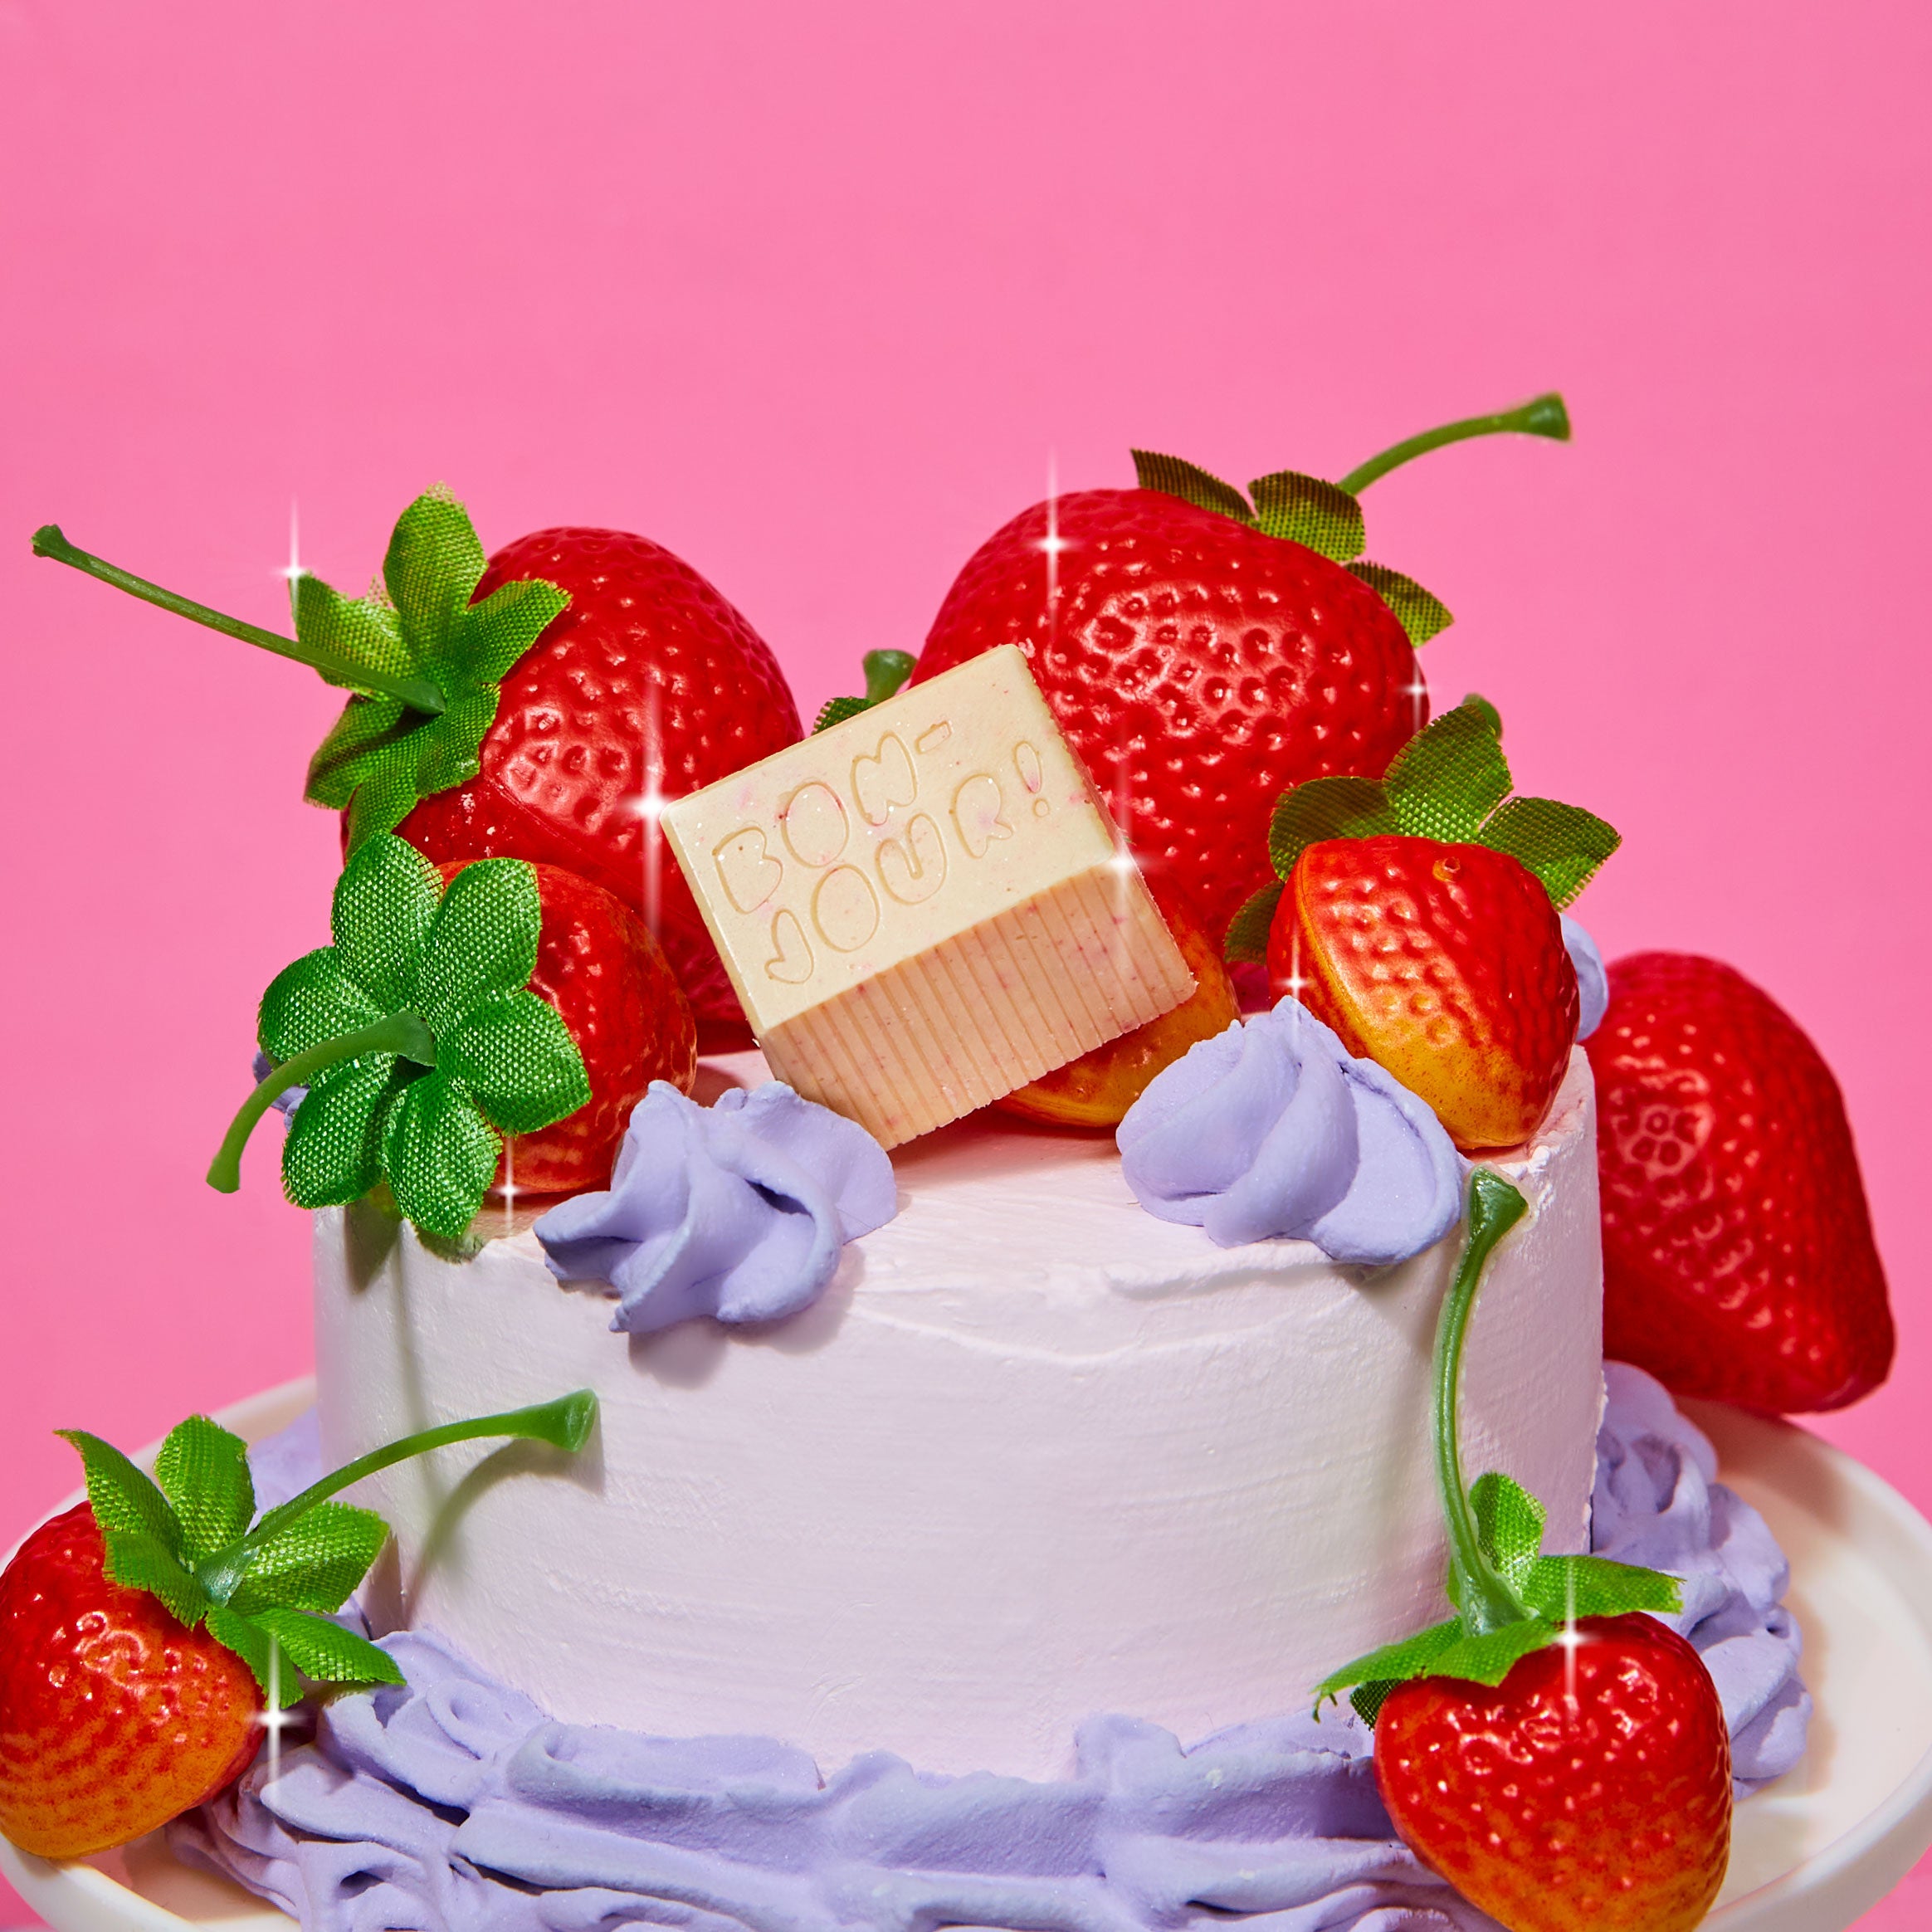 S&M: Strawberries, Mascarpone and Other Romantic Ideas